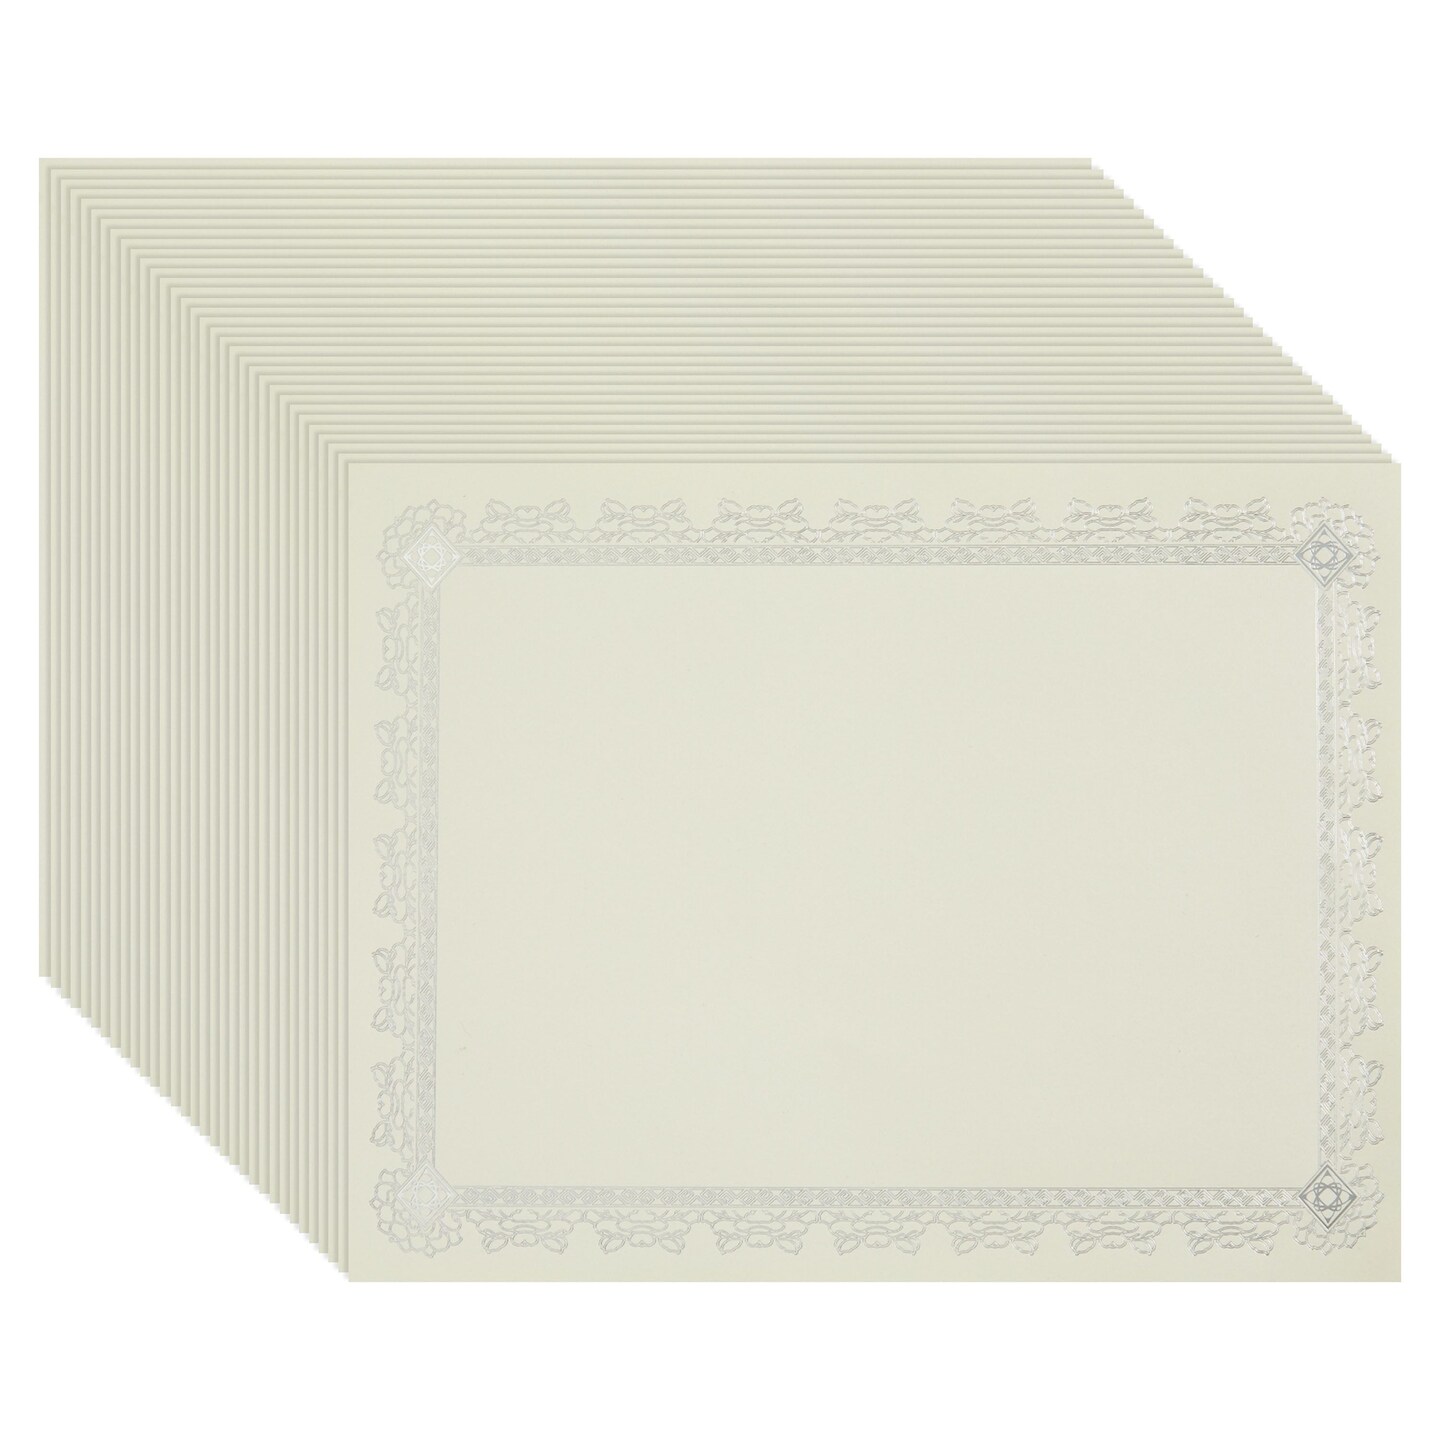 Certificate Paper 8.5 x 11 Inches, 50-Pack Diploma Paper, Letter Size,  Blank, Silver Borders